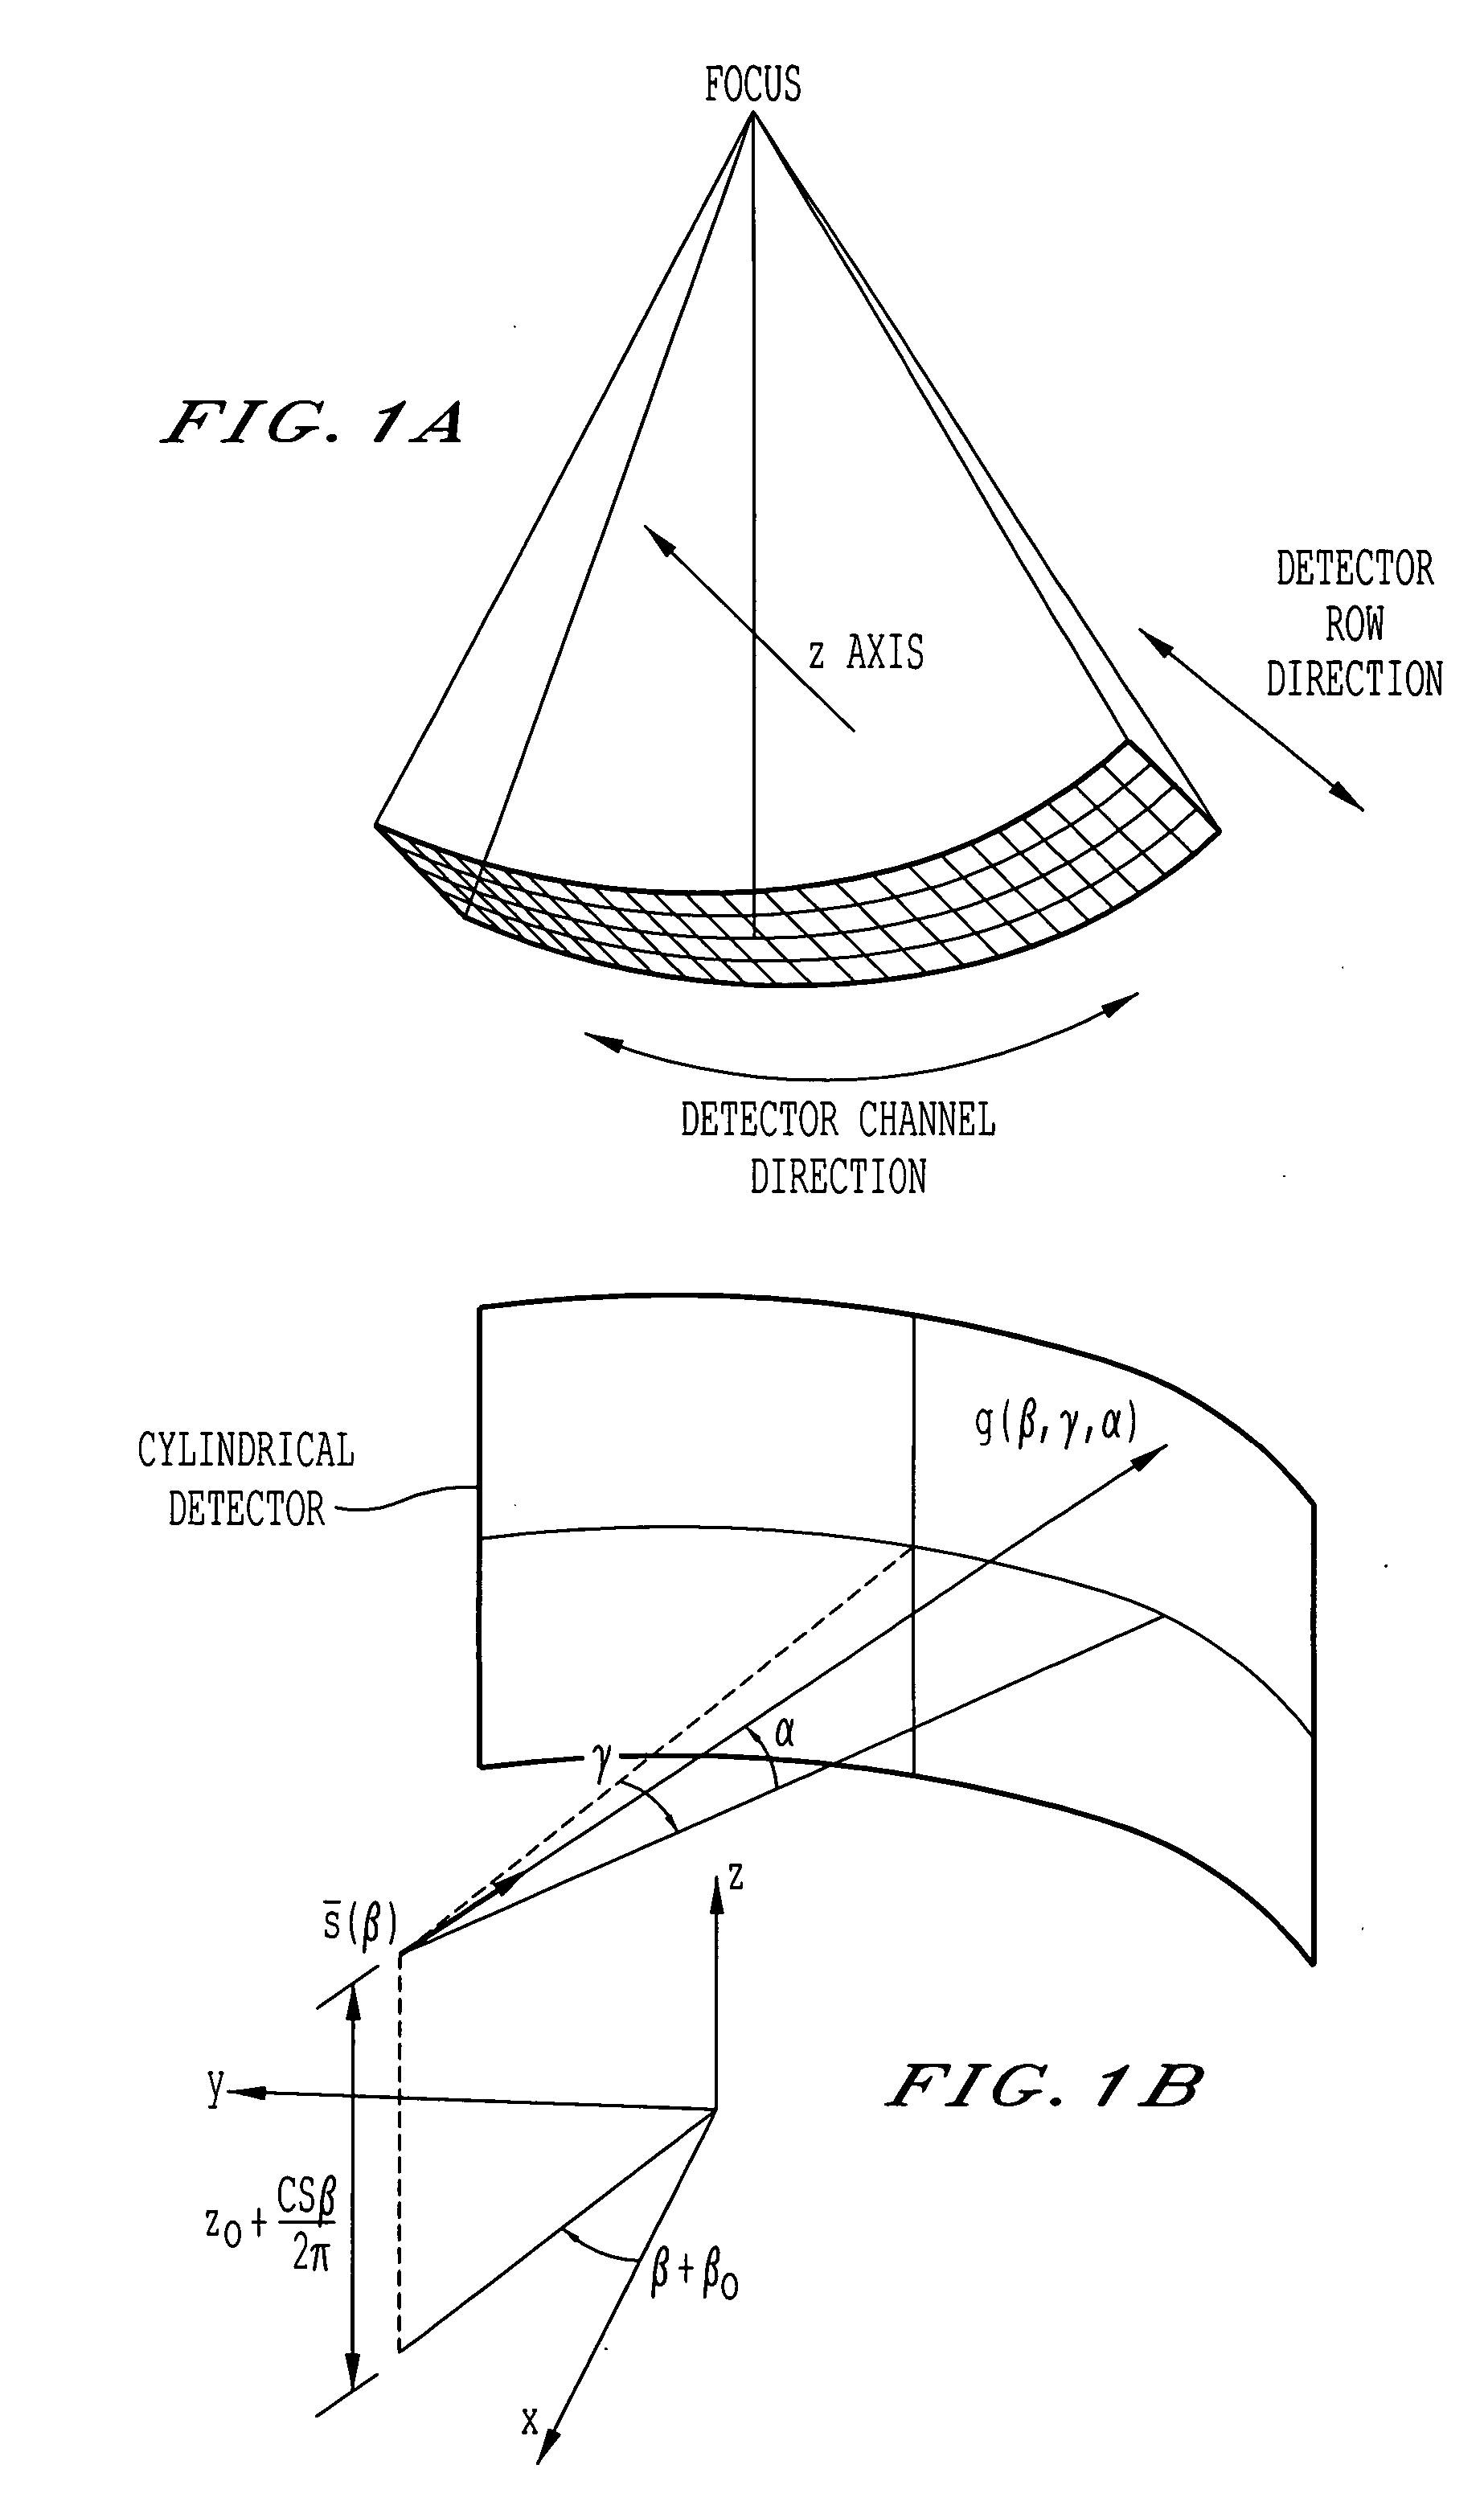 Radius-in-image dependent detector row filtering for windmill artifact reduction